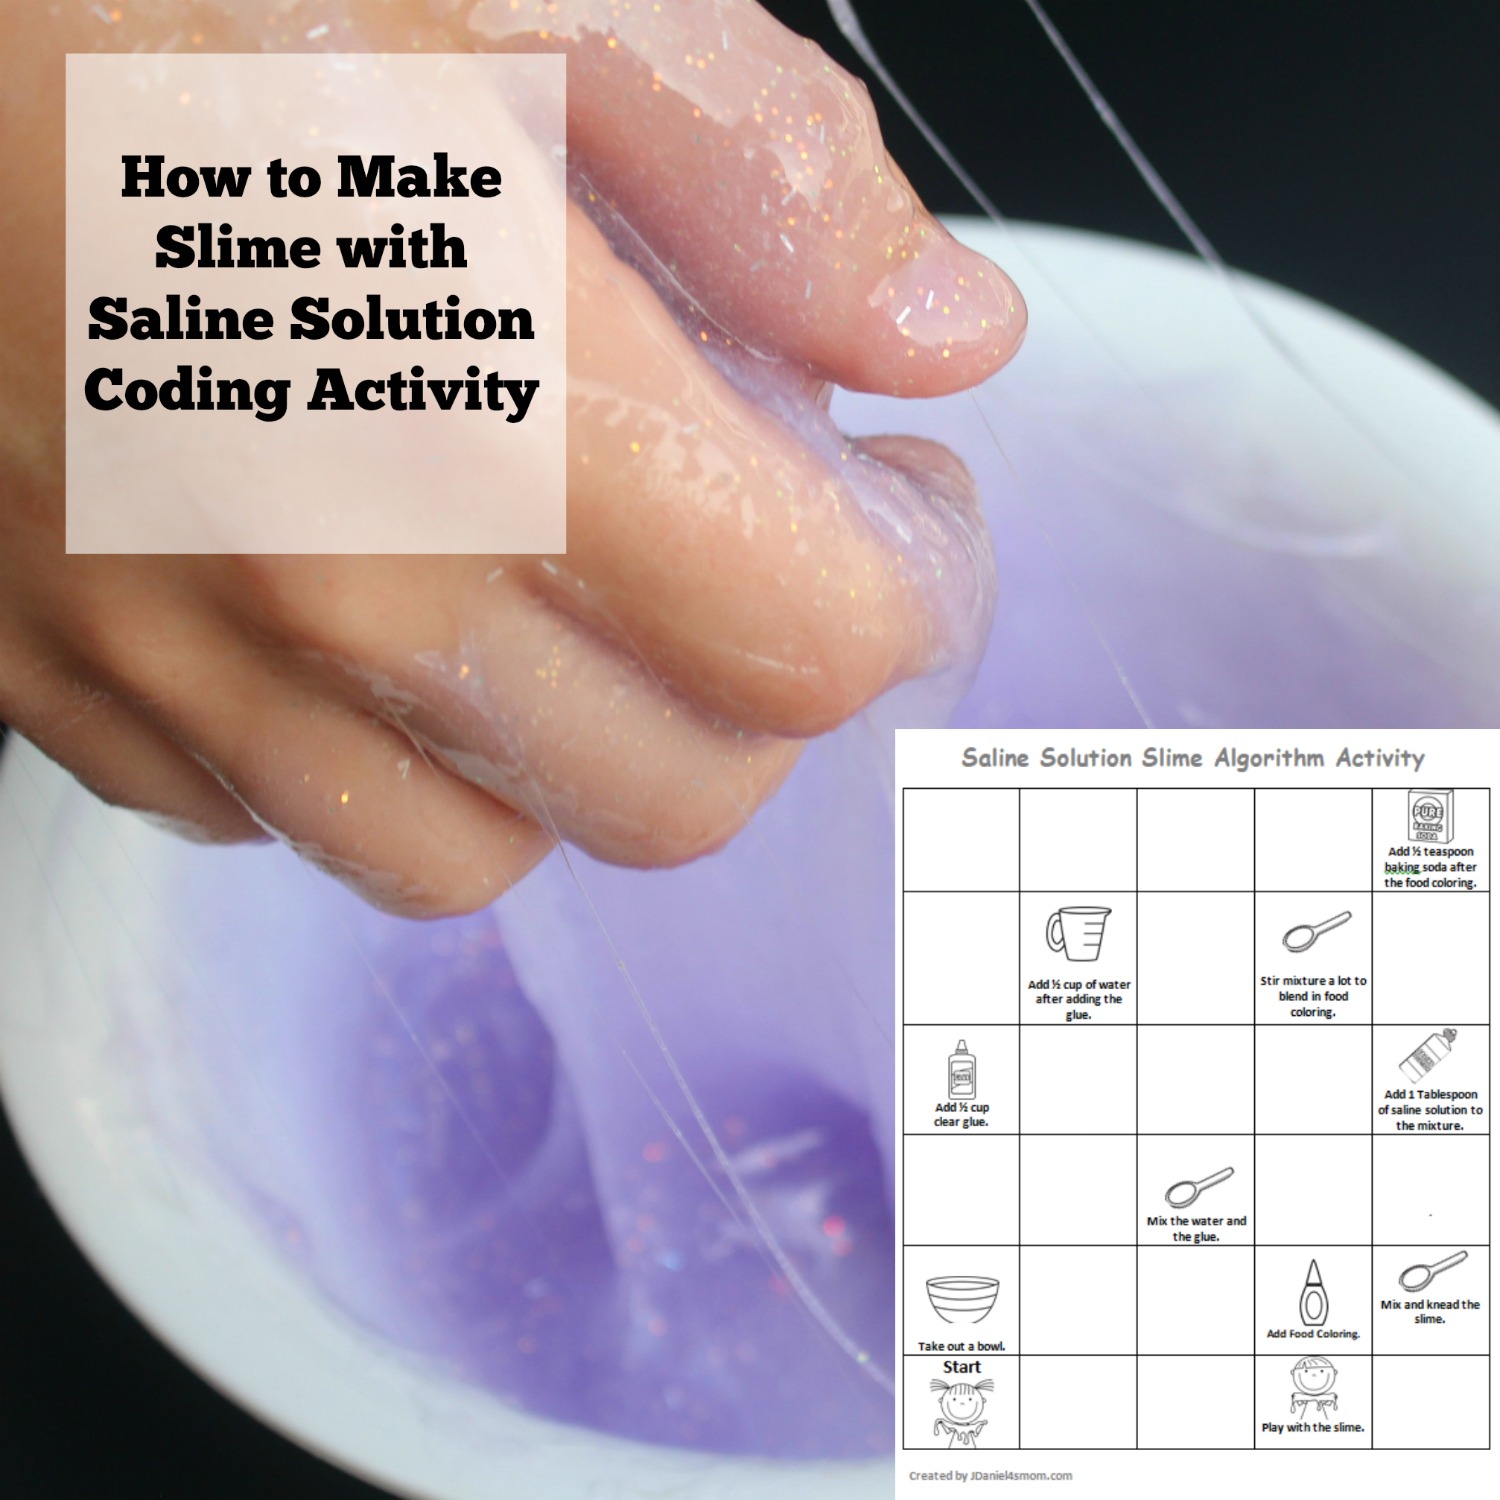 How to Make Slime with Saline Solution Coding Activity 